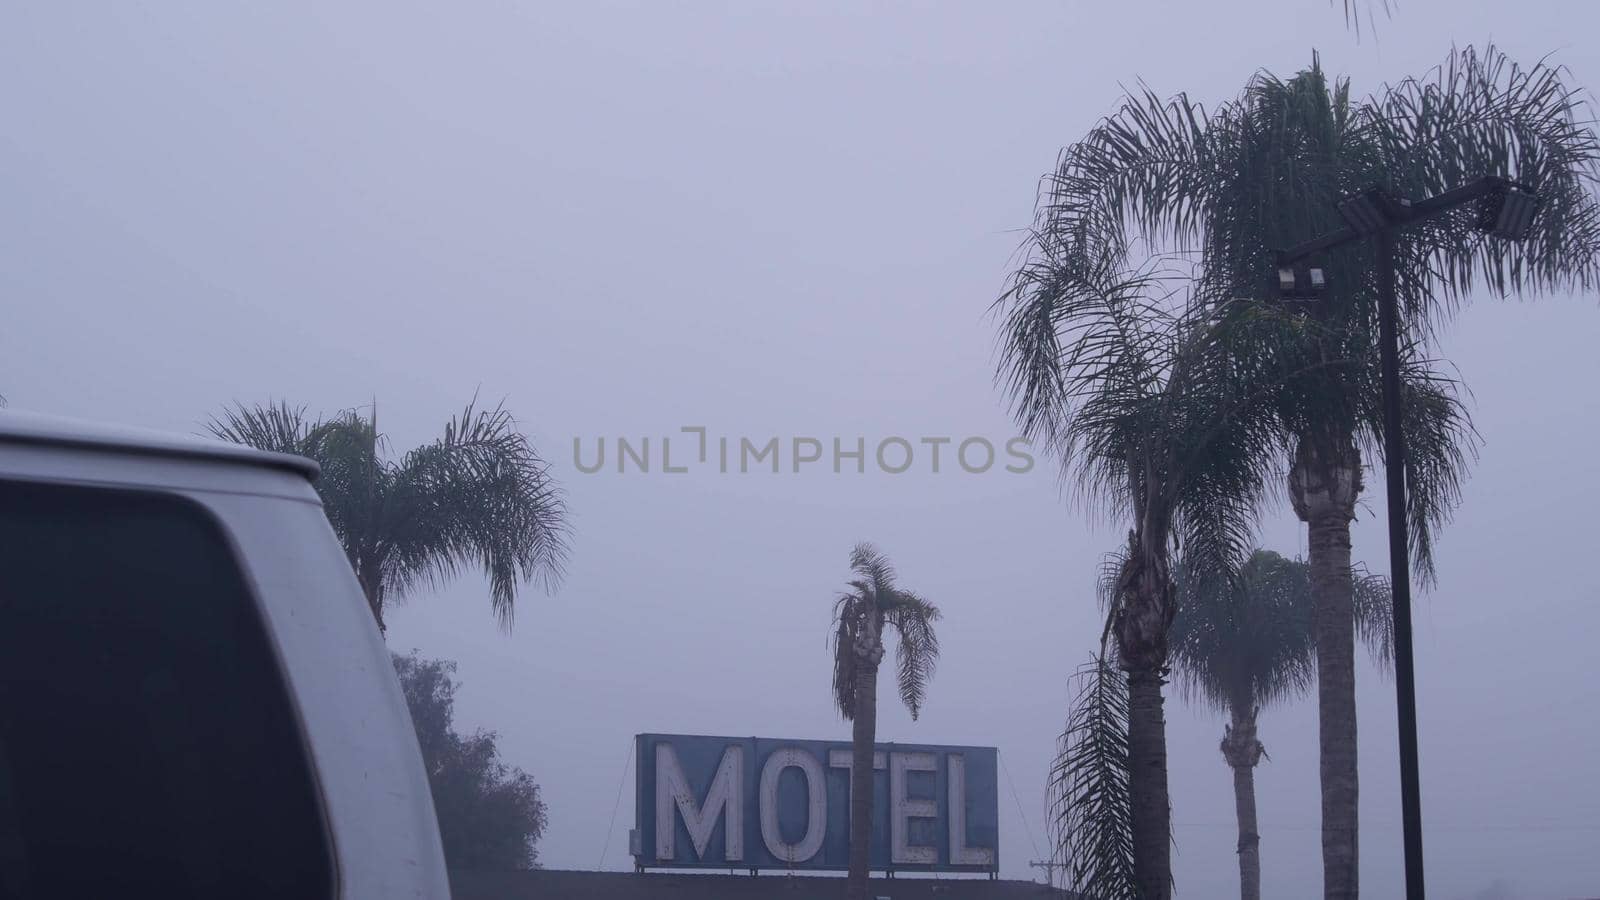 Sign of road motel or hotel, foggy misty weather California, USA. Palm trees. by DogoraSun